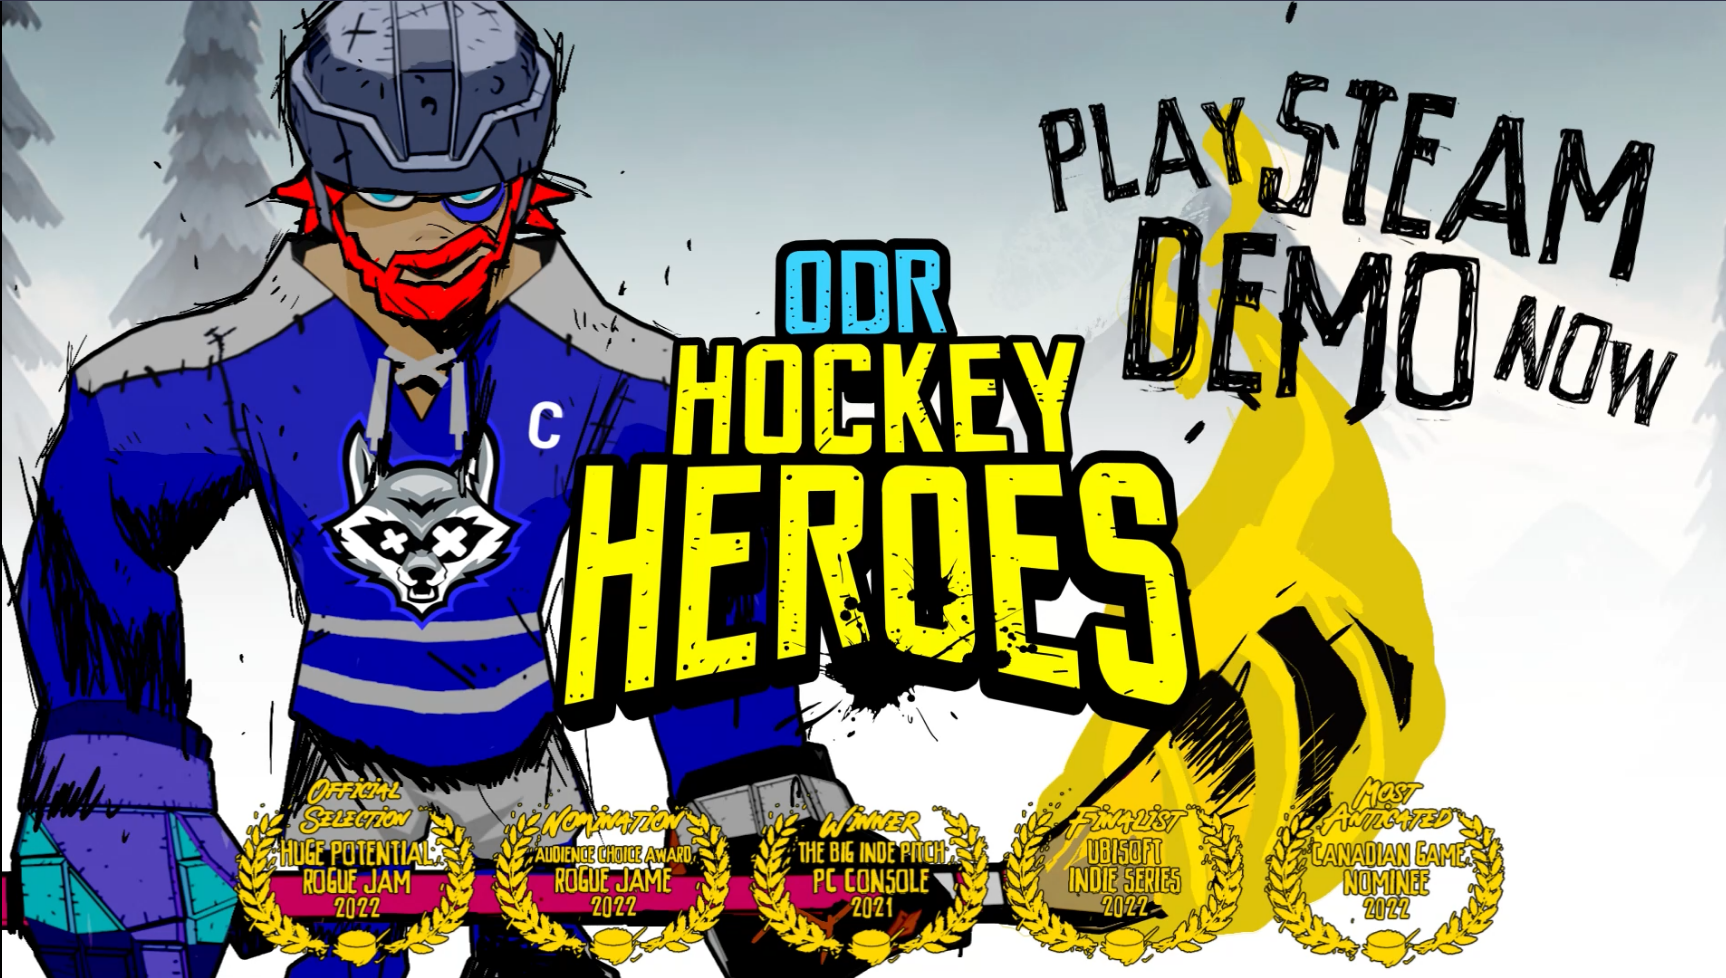 ODR Hockey Heroes: game development beyond the city limits